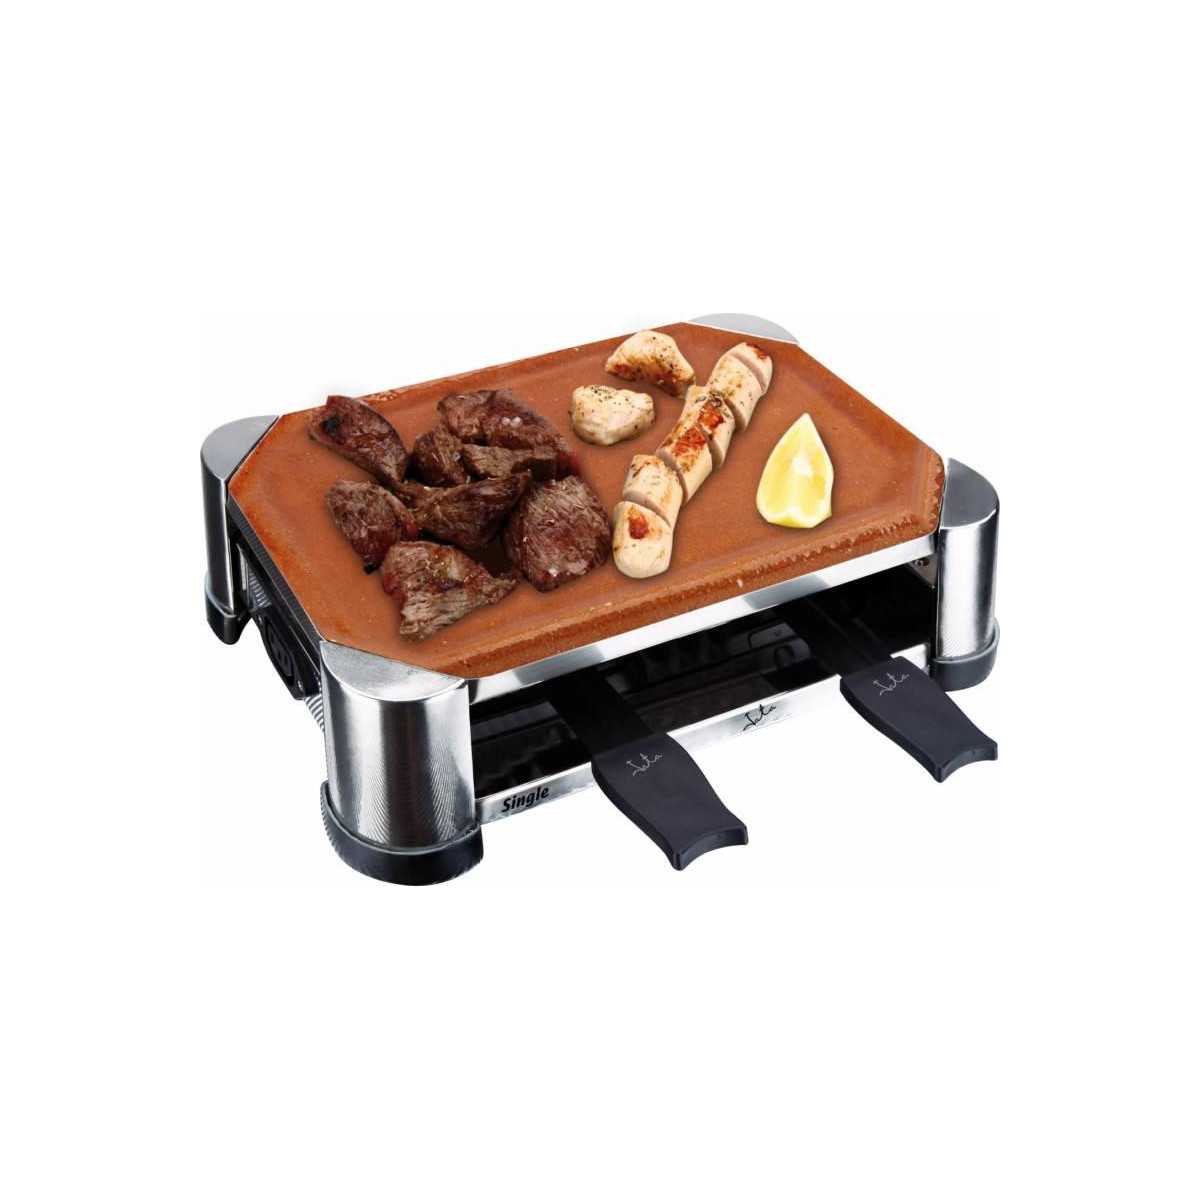 Grill-raclette Jata GT202, 500w, 28x18cm, 2 racle. - 1